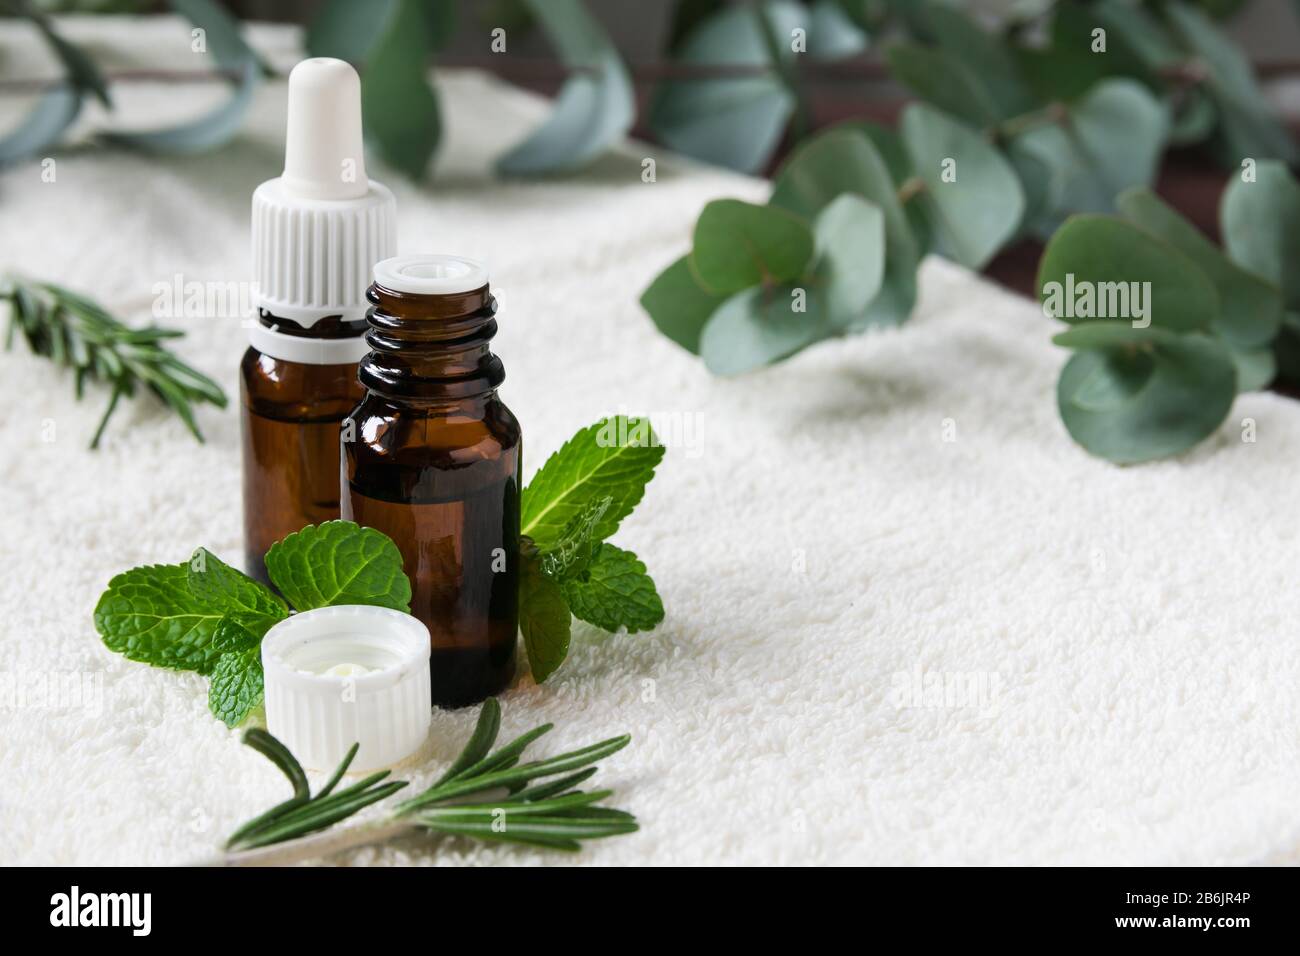 glass bottles with natural essential oils on a white towel with mint, rosemary and eucalyptus leaves Stock Photo